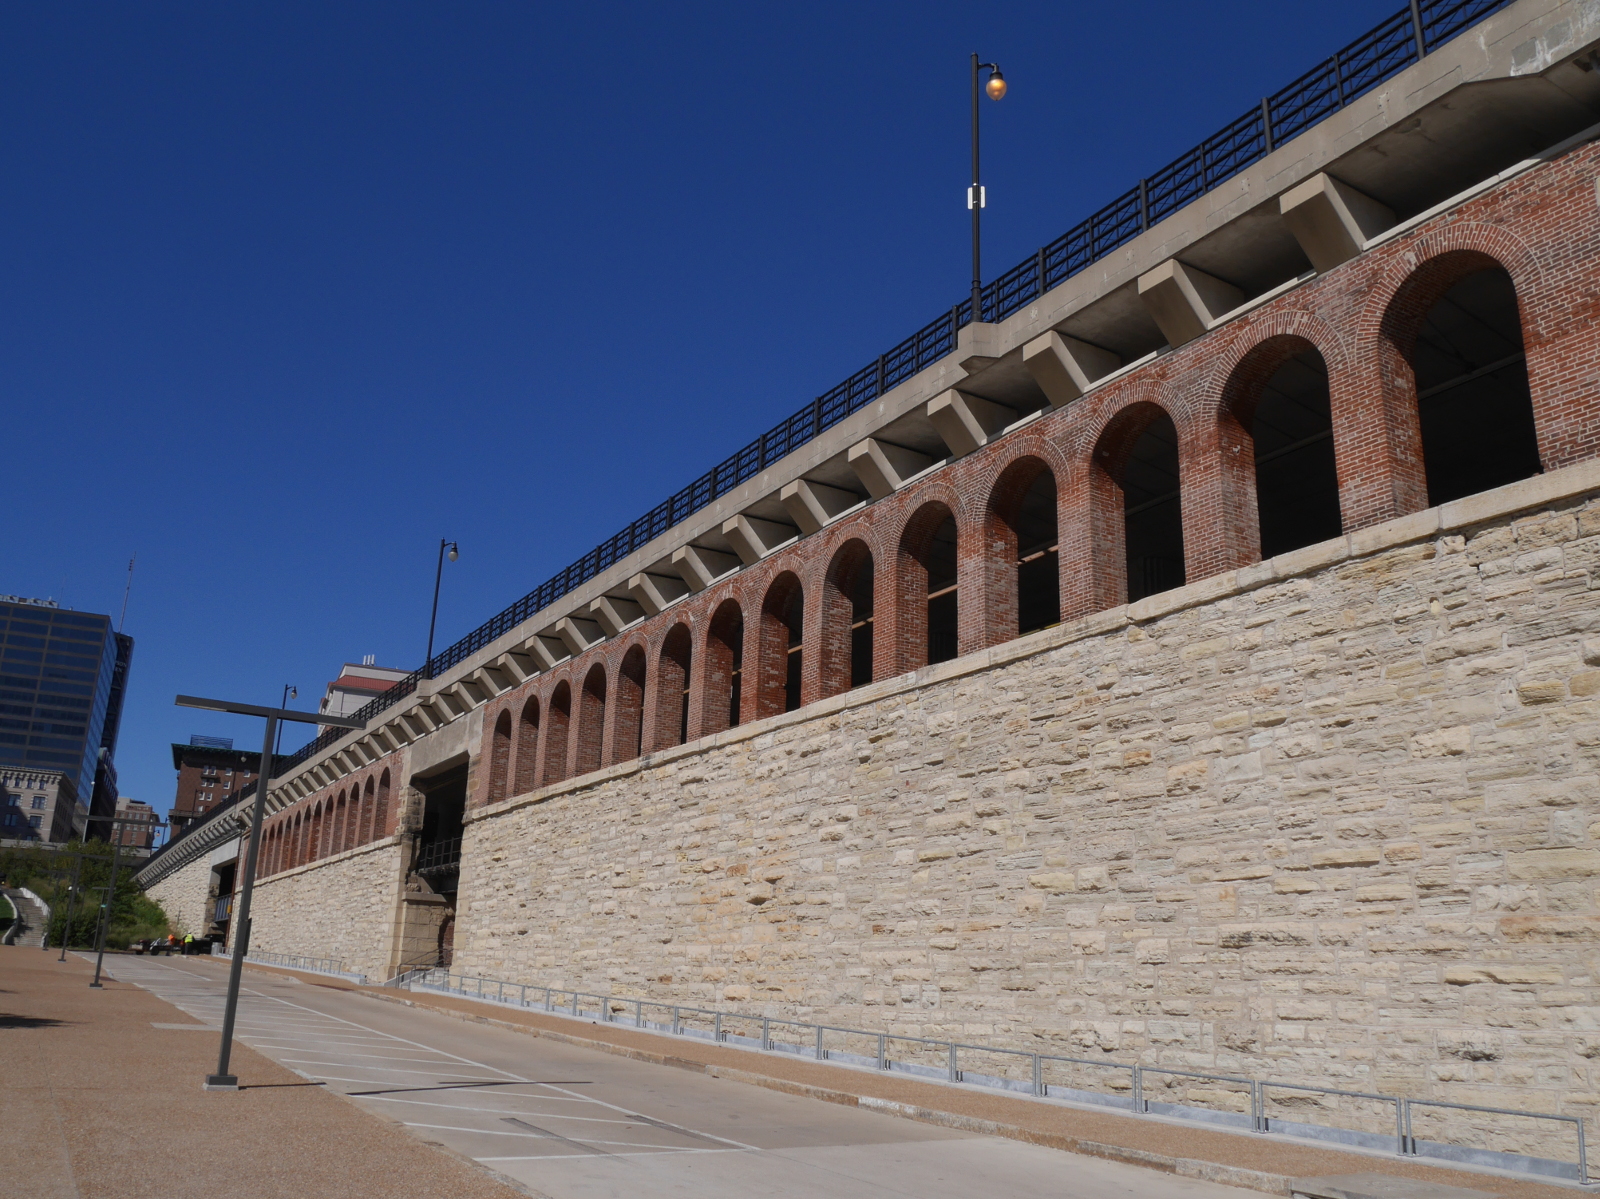 The imposing stone approach works on the Missouri side of the bridge. The upper deck of the bridge carries vehicles and pedestrian traffic, and the lower deck has tracks for the Metrolink streetcar system.